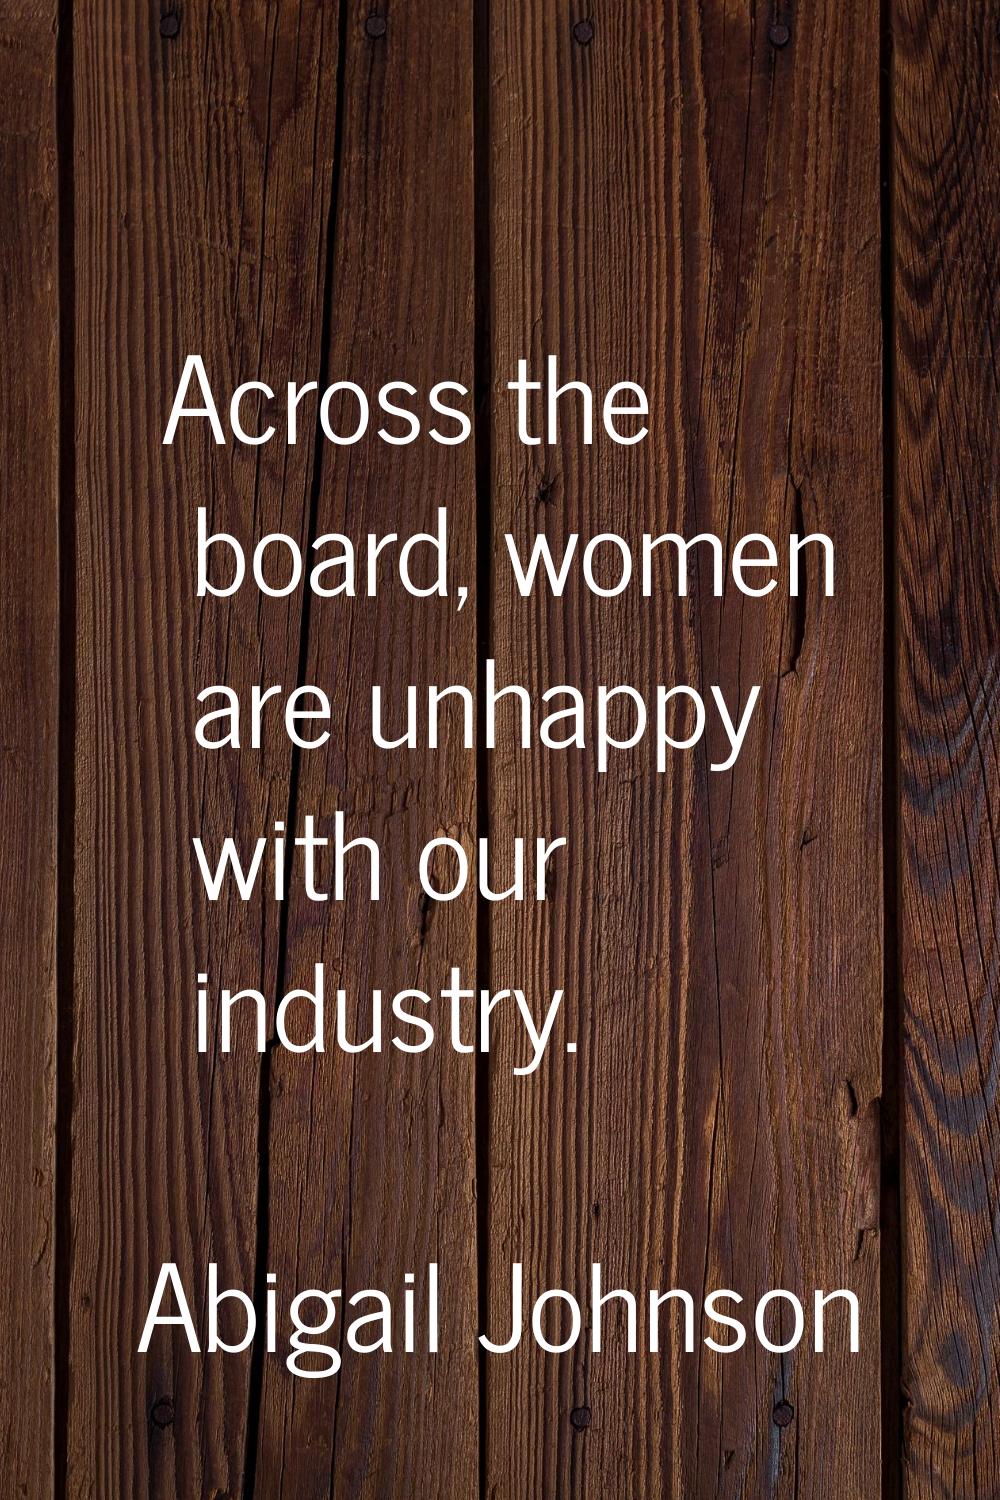 Across the board, women are unhappy with our industry.